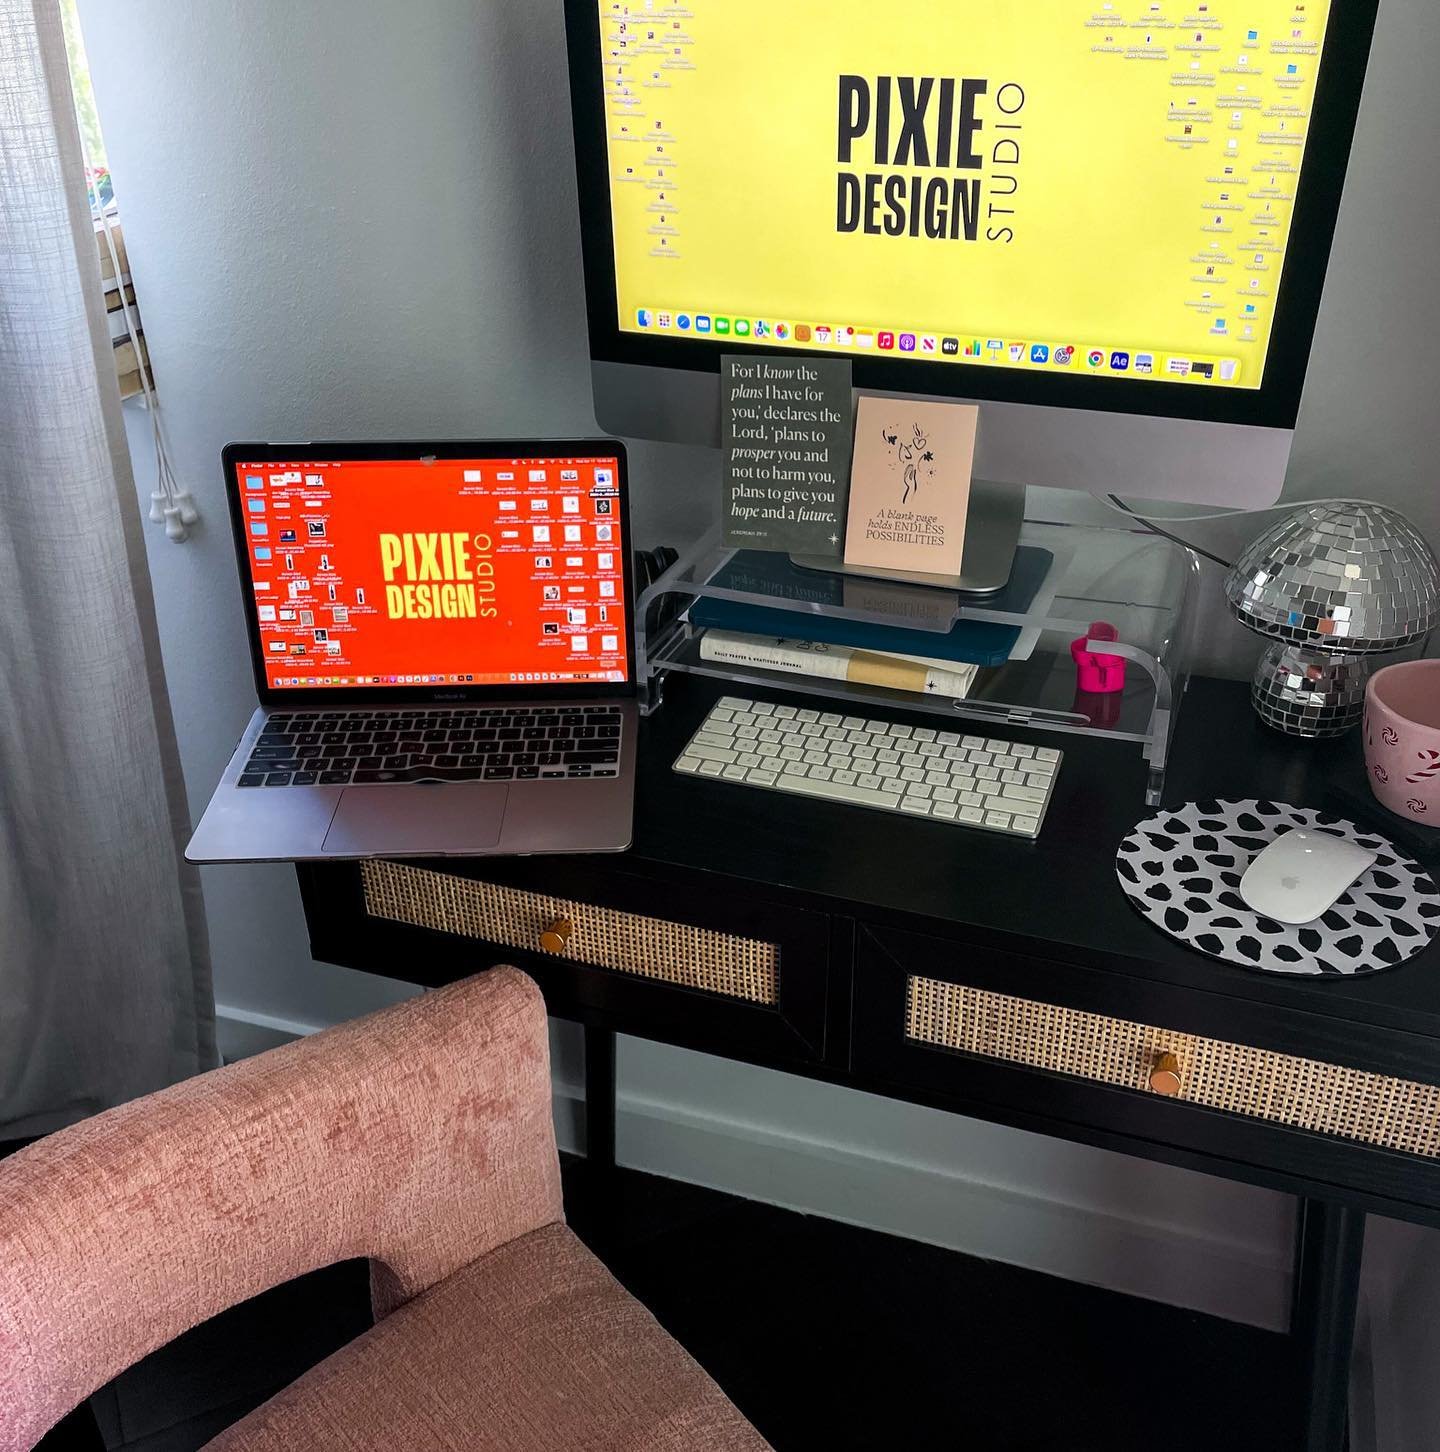 My current office set-up🤓💻(Still a work in progress🔨👷&zwj;♀️🚧). I am definitely needing a cool colorful lamp, some art on my walls, an iPad stand, maybe a little plant?🧐
-
🧚&zwj;♀️Pixie Design Studio - Making your design dreams a reality✨
.
.
